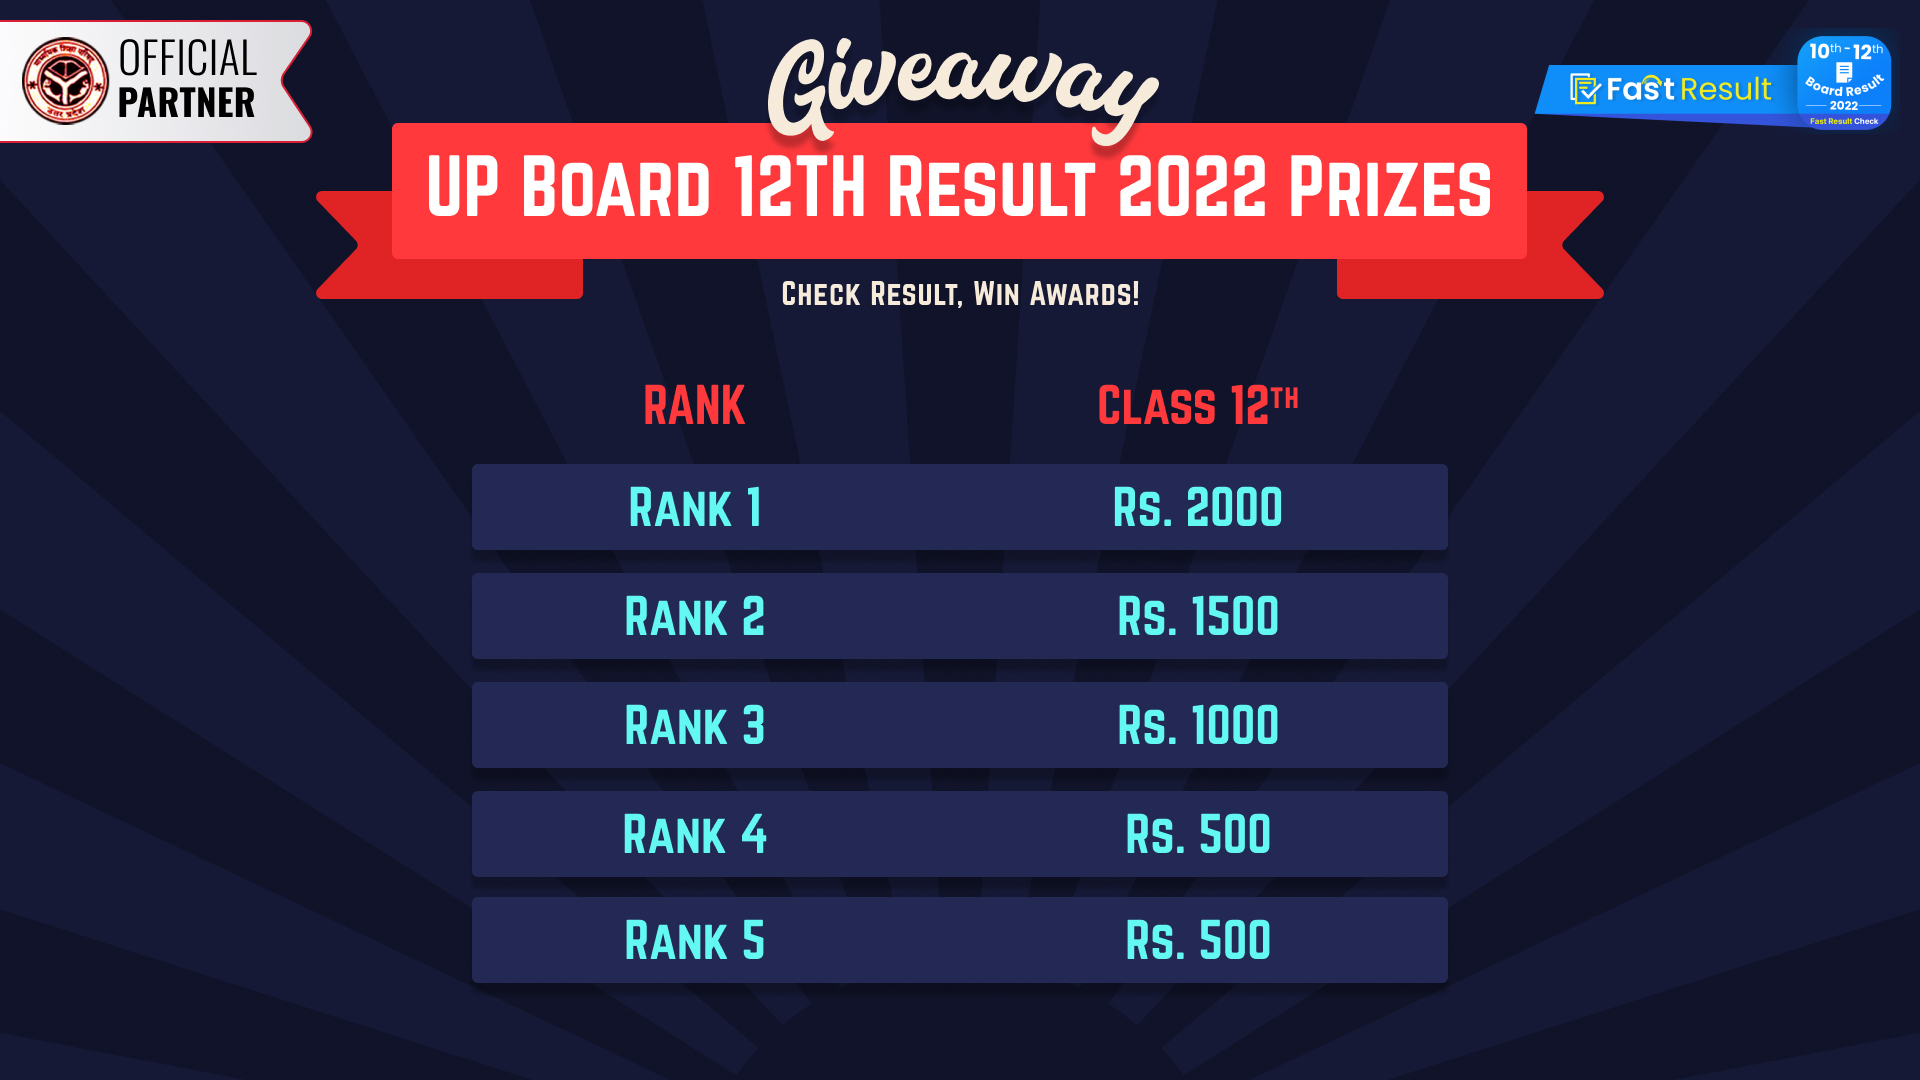 UP Board Class 12 Result 20220